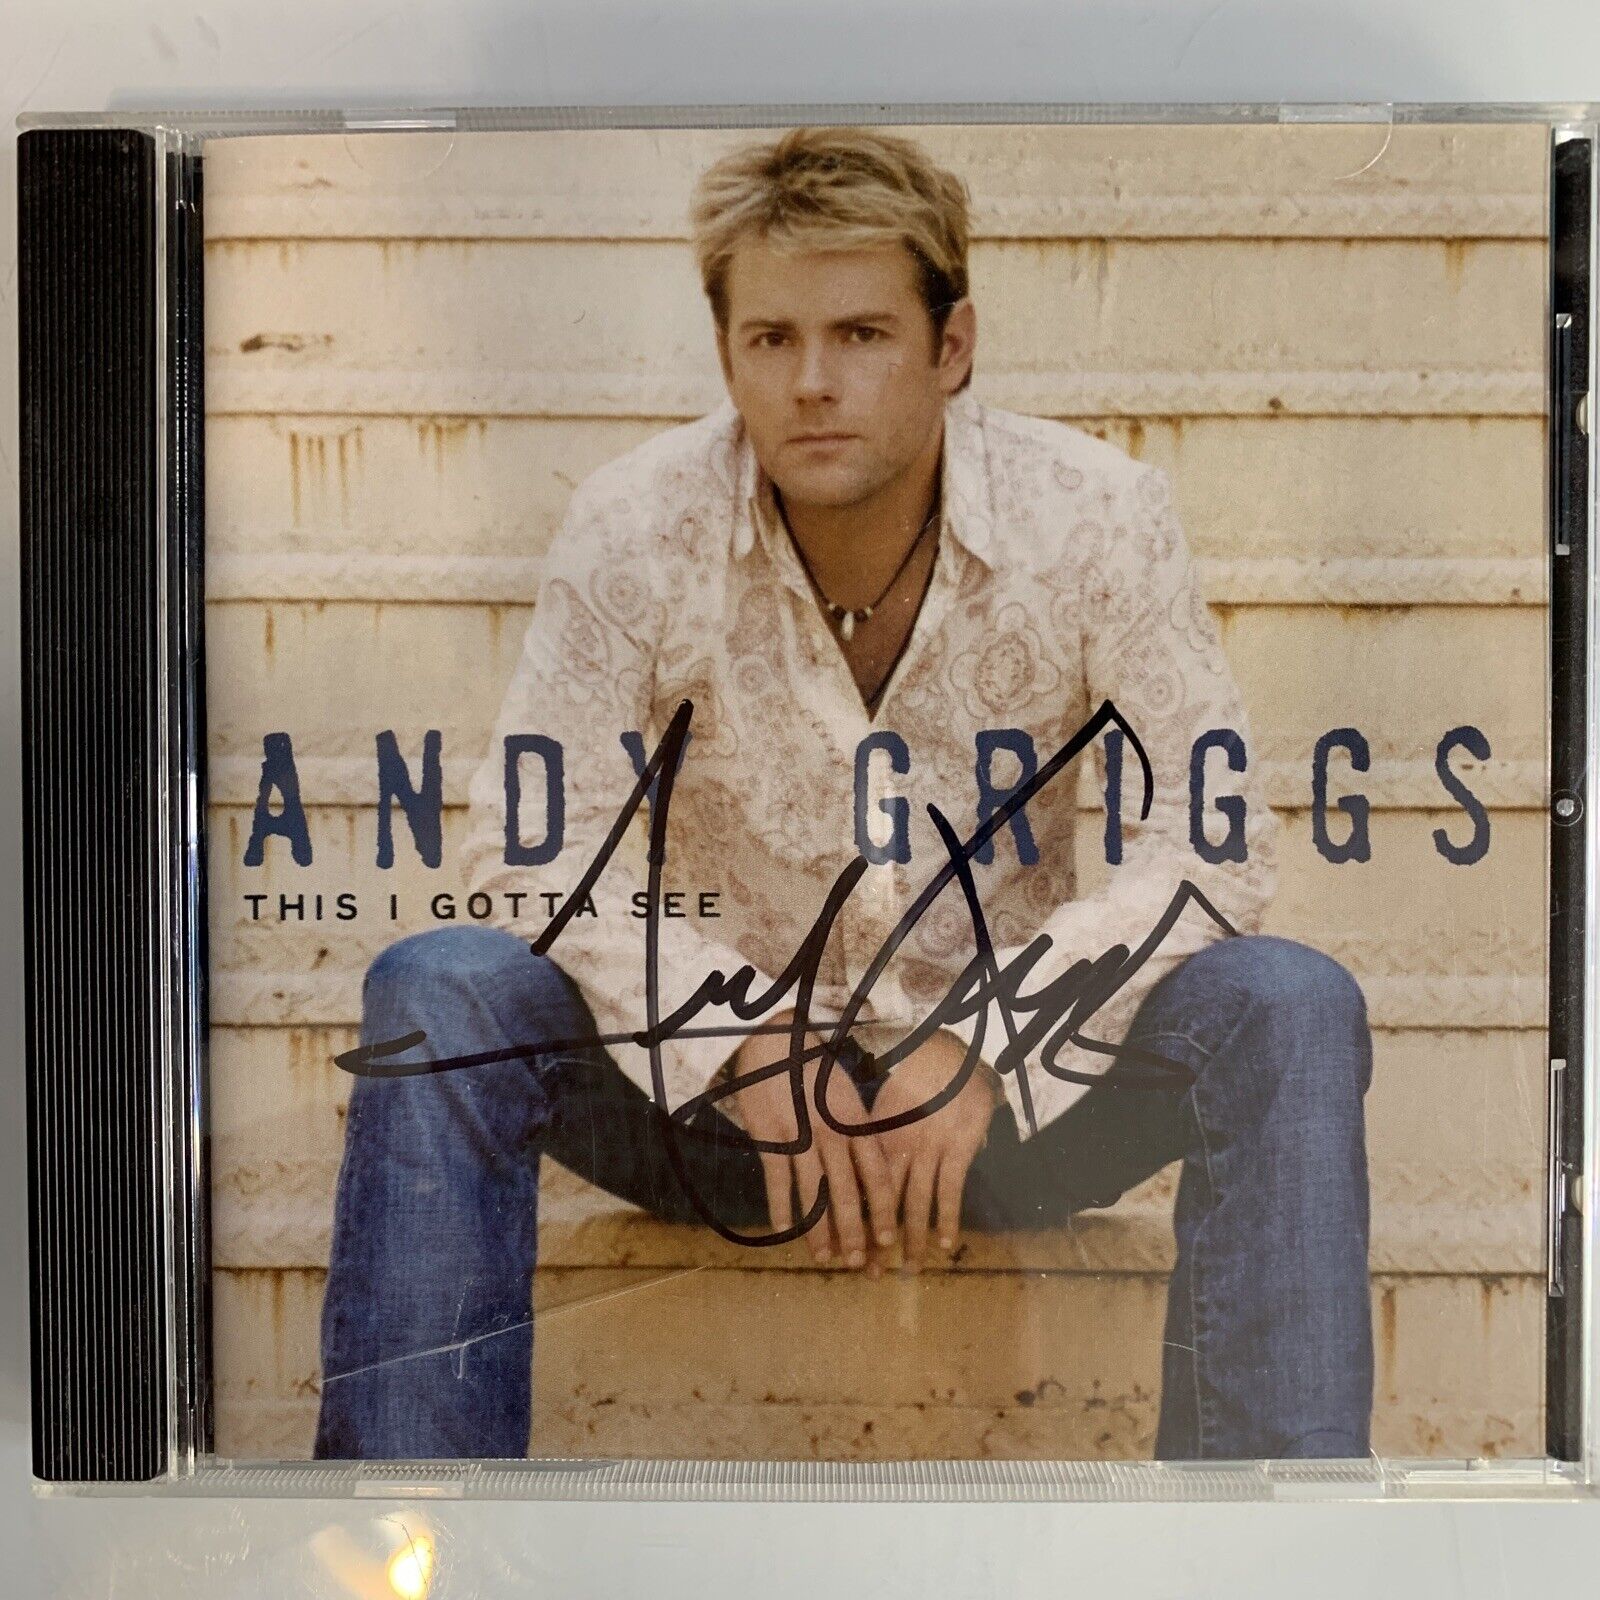 This I Gotta See by Andy Griggs (CD, Aug-2004, RCA) Signed